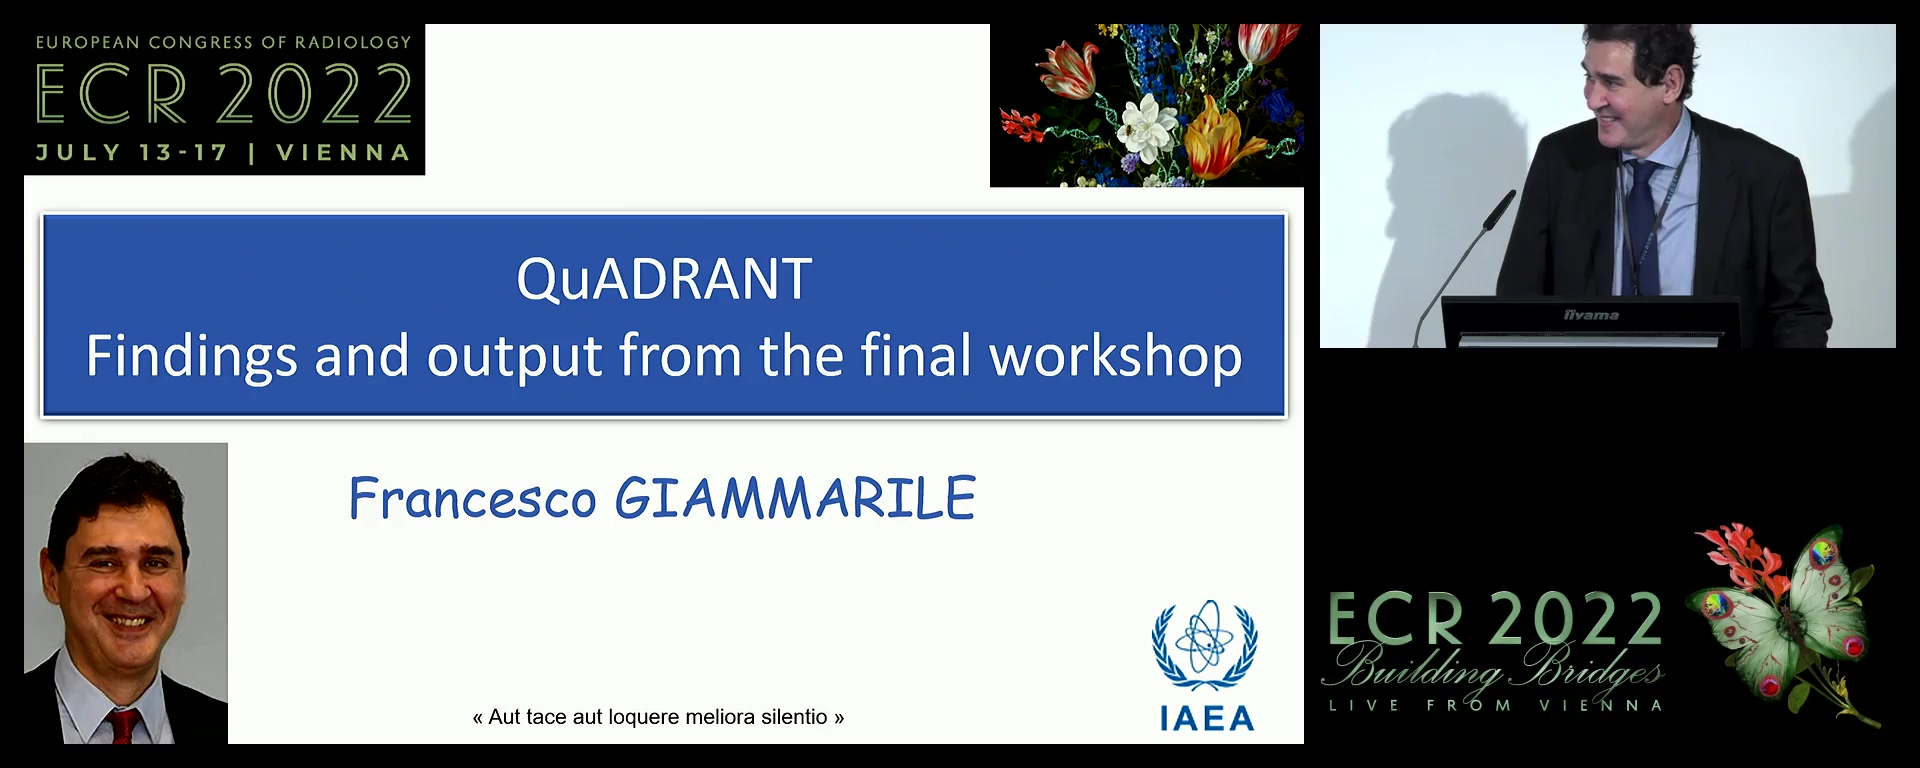 QuADRANT: findings and output from the final workshop - Francesco Giammarile, Vienna / AT